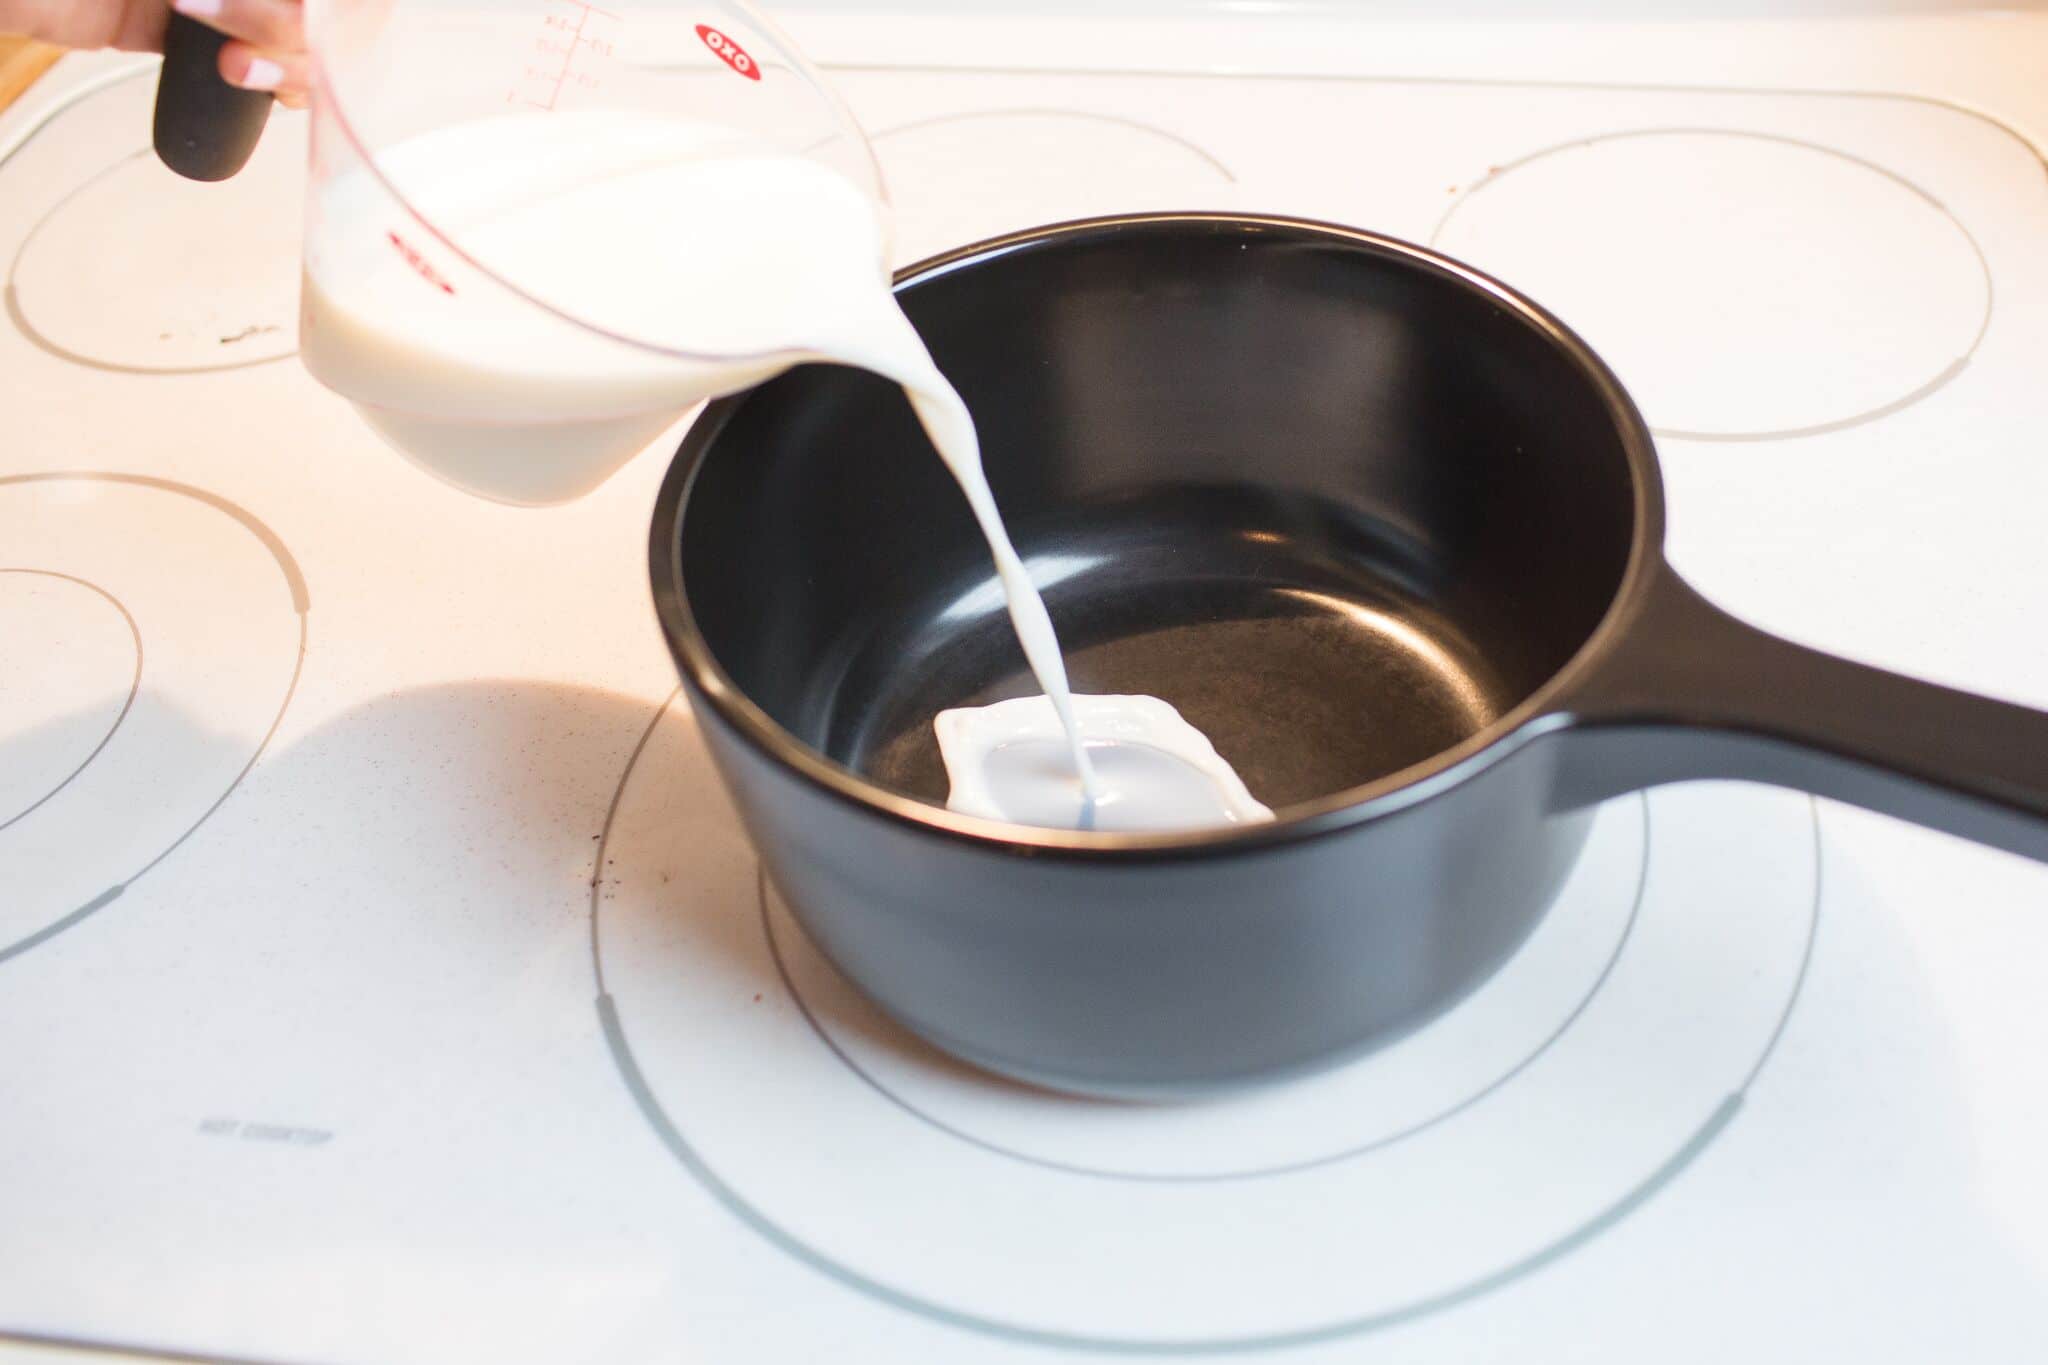 Add milk into a sauce pan over low heat